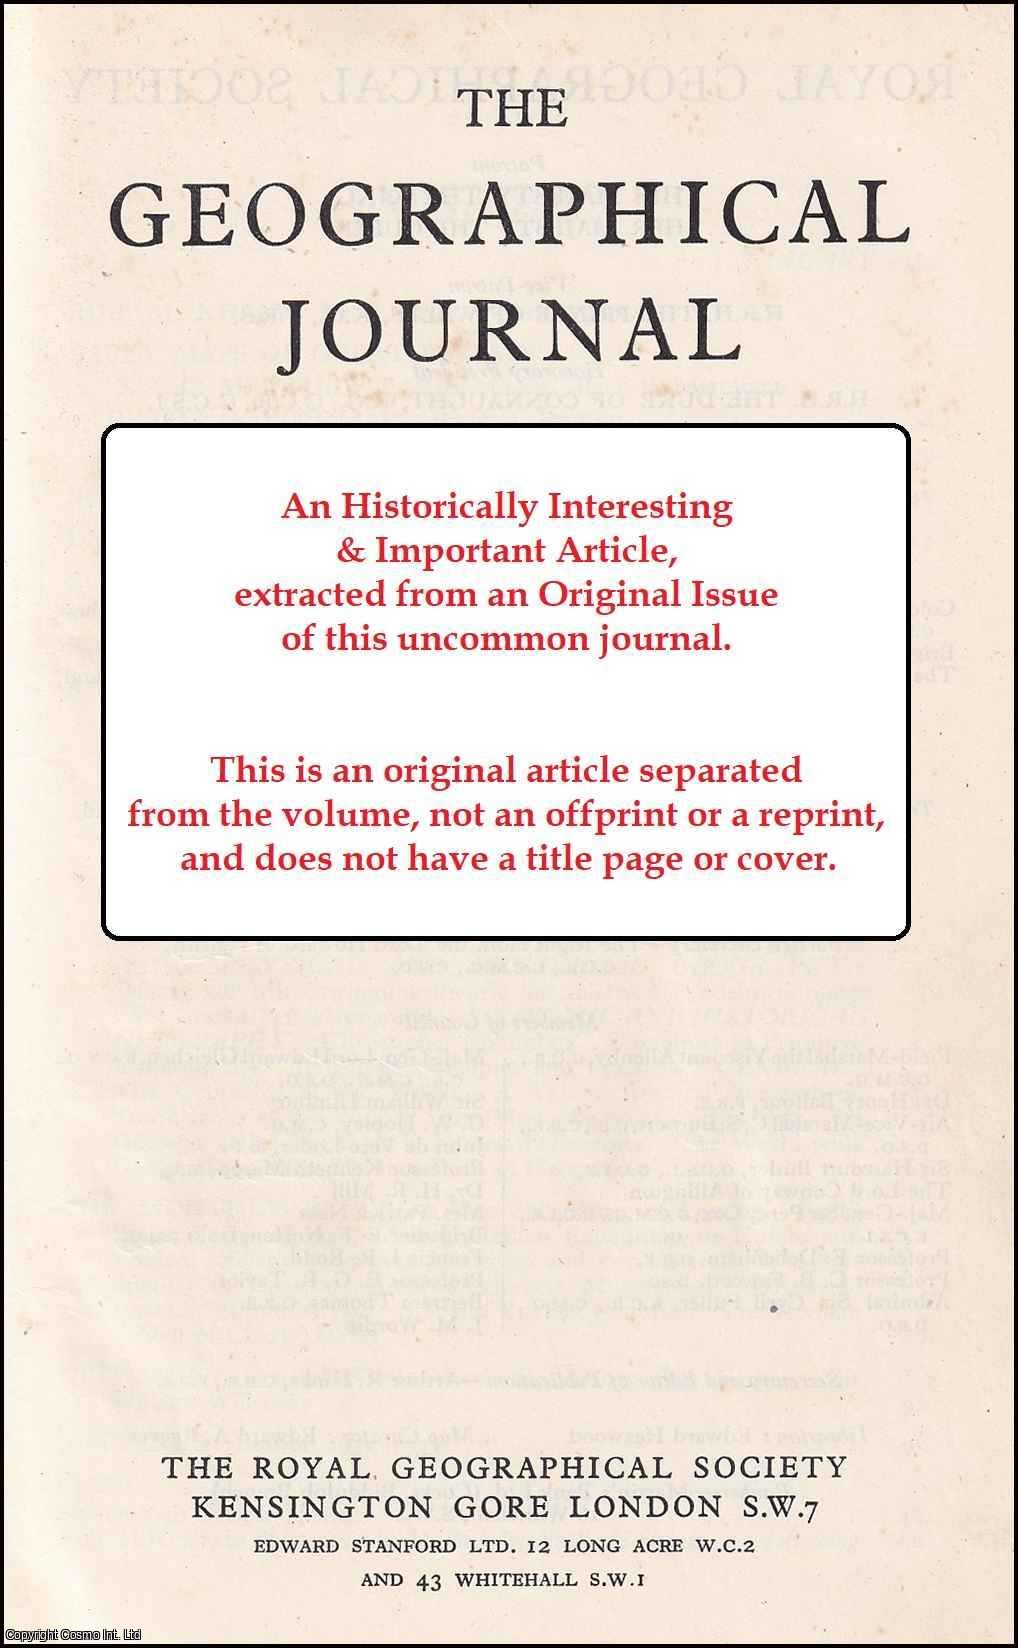 O. T. Jones - Continental Slopes and Shelves. An original article from the Geographical Journal, 1941.